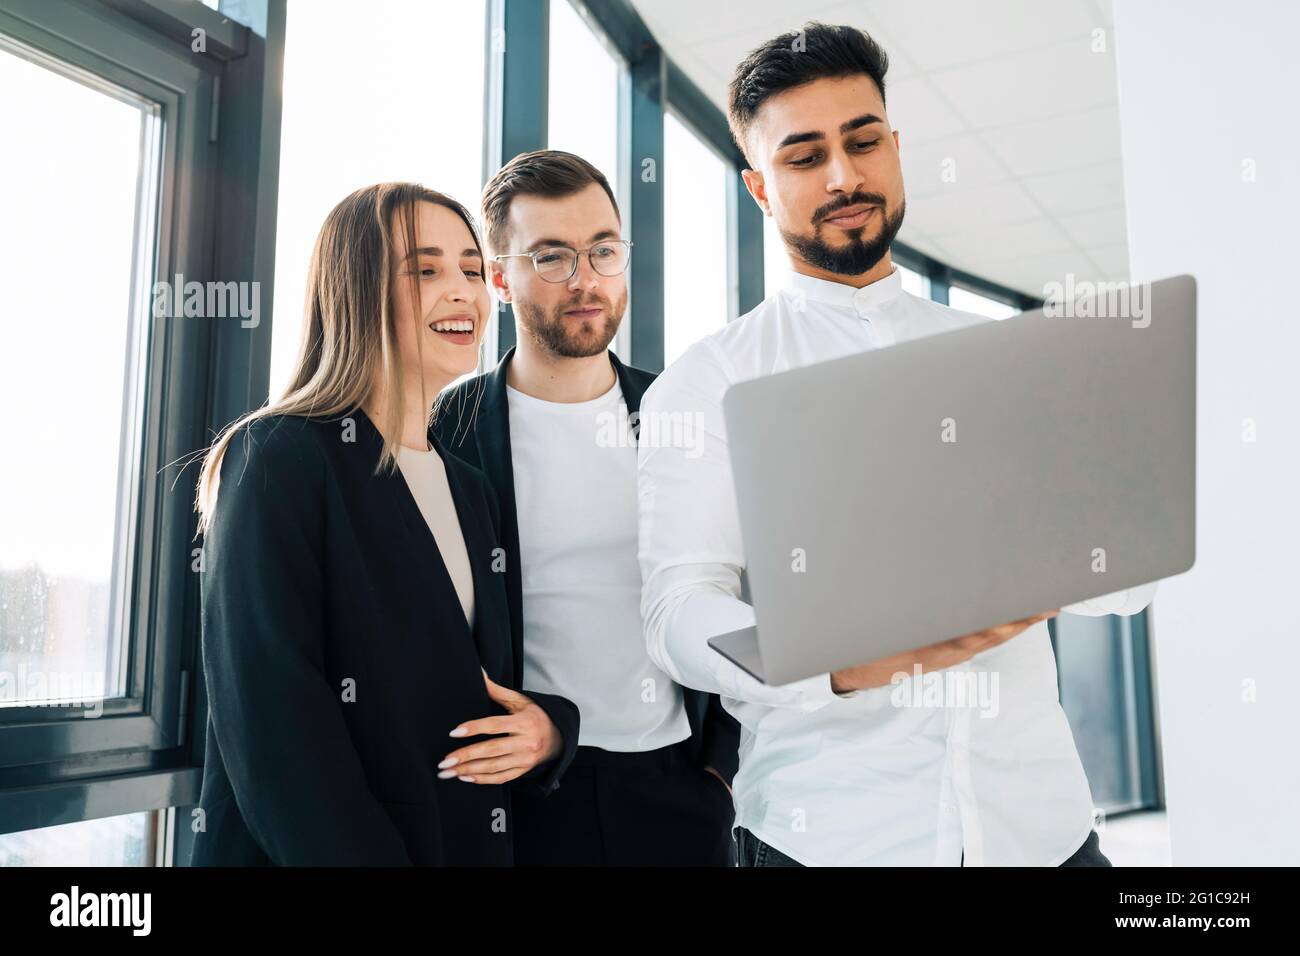 Three office workers looking at a laptop discussing the company's growth rate Stock Photo